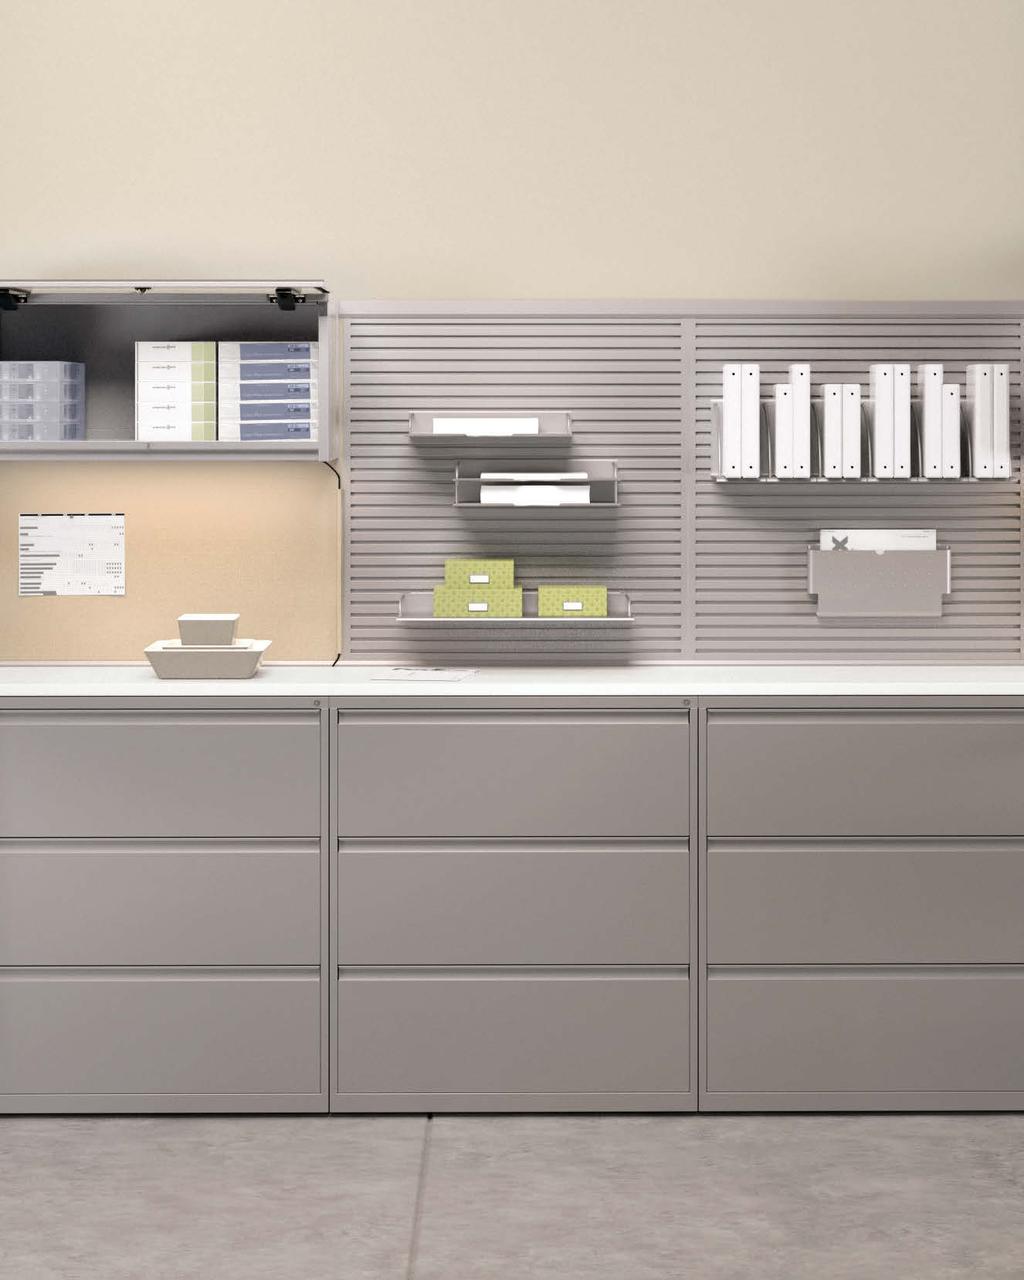 41 FILING+STORAGE EFFICIENT SOLUTIONS STREAMLINED